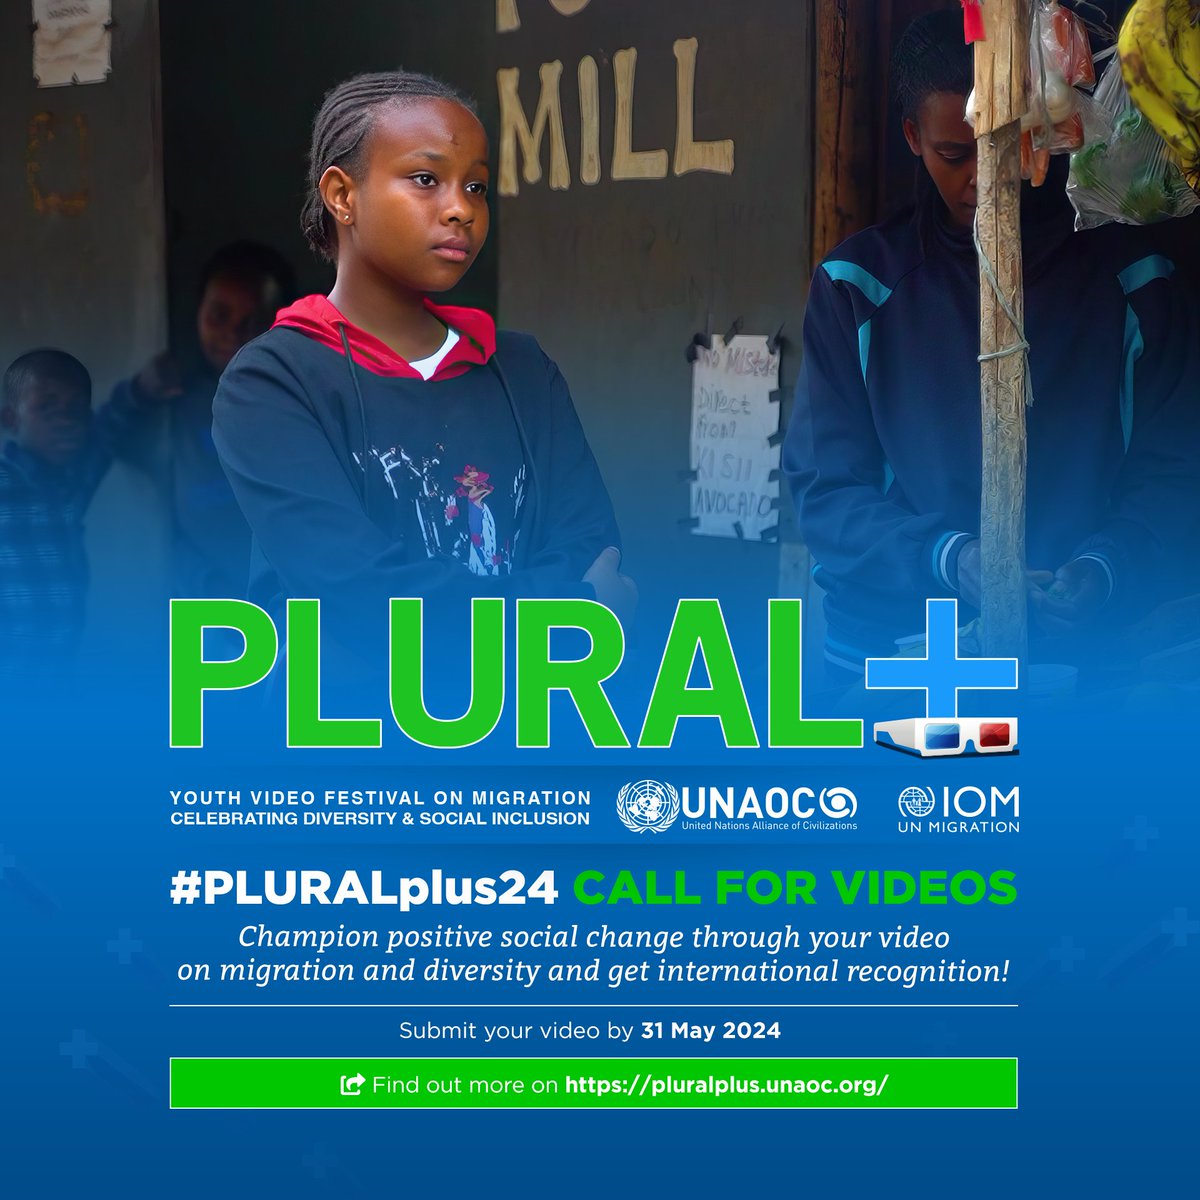 🎥Filmmakers across all genres have a unique opportunity to change perceptions on urgent topics like #migration, #diversity or #social #inclusion and create positive social impact across the 🌍 Submit your short video to the #PLURALplus24 video festival: pluralplus.unaoc.org